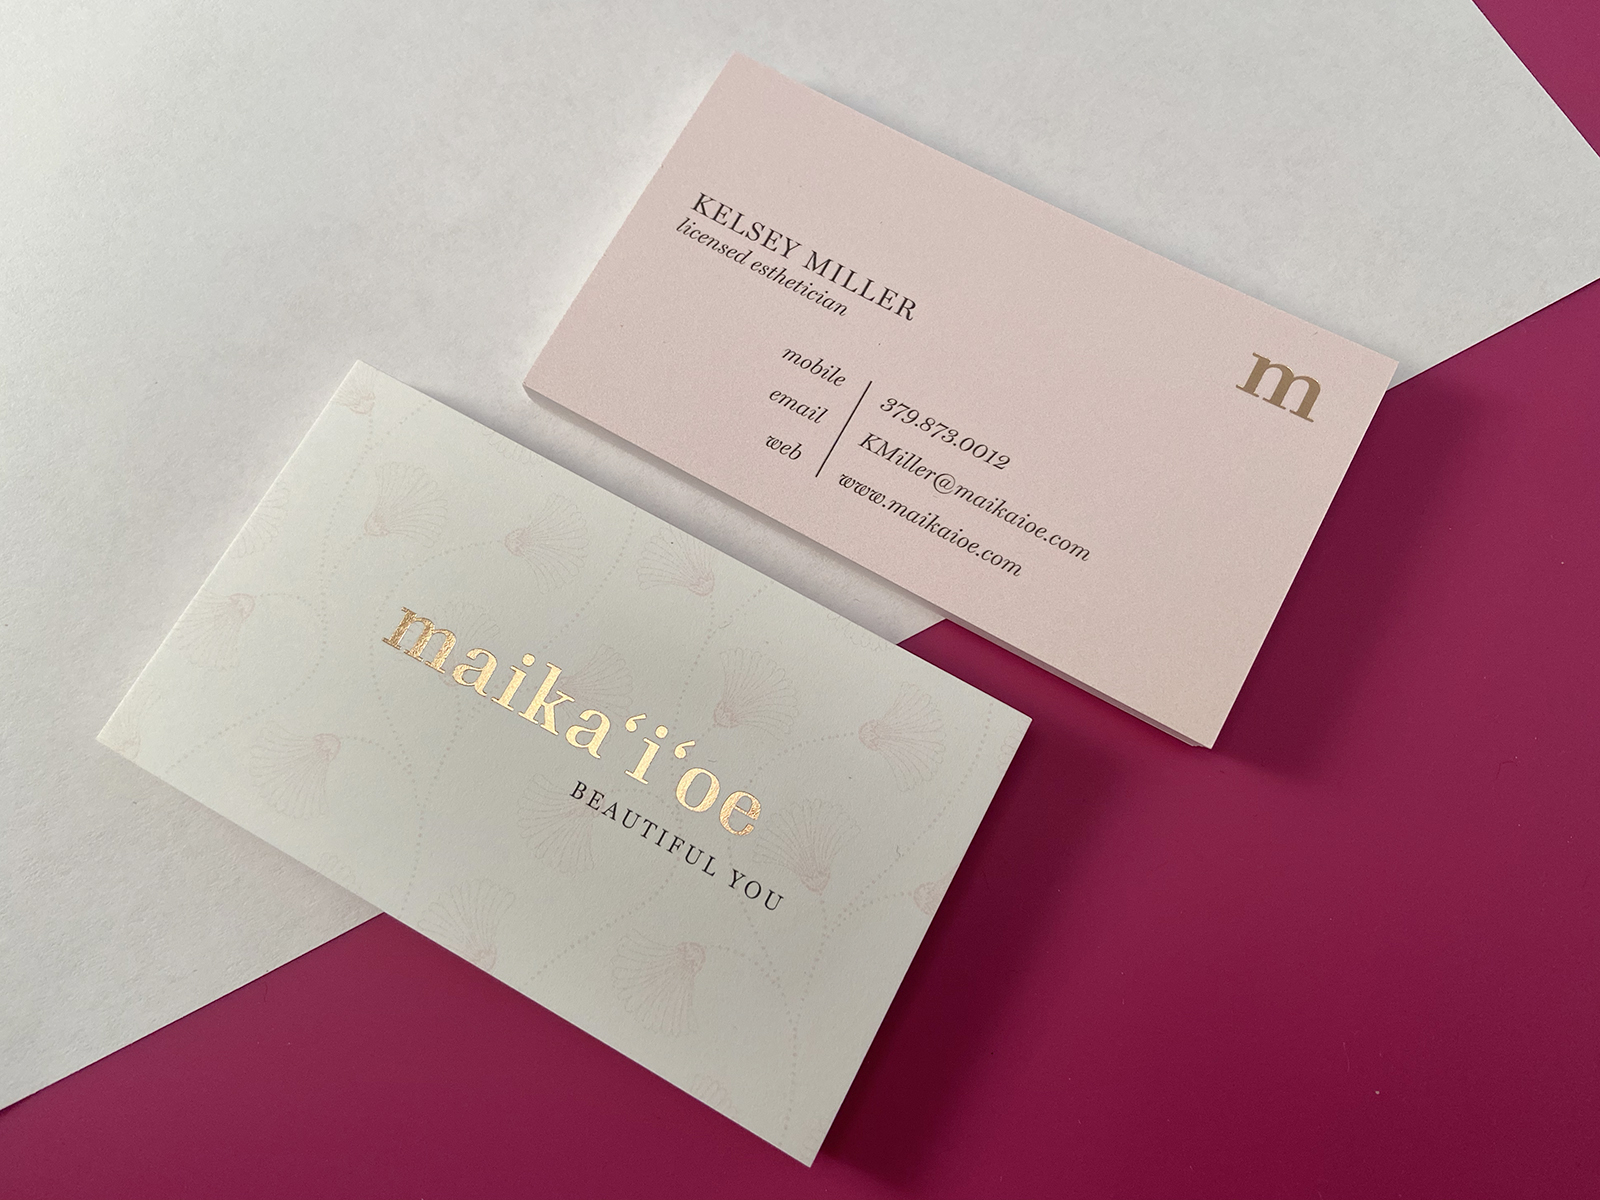 Esthetician Business Cards Girly Cosmetology Business Cards Girly